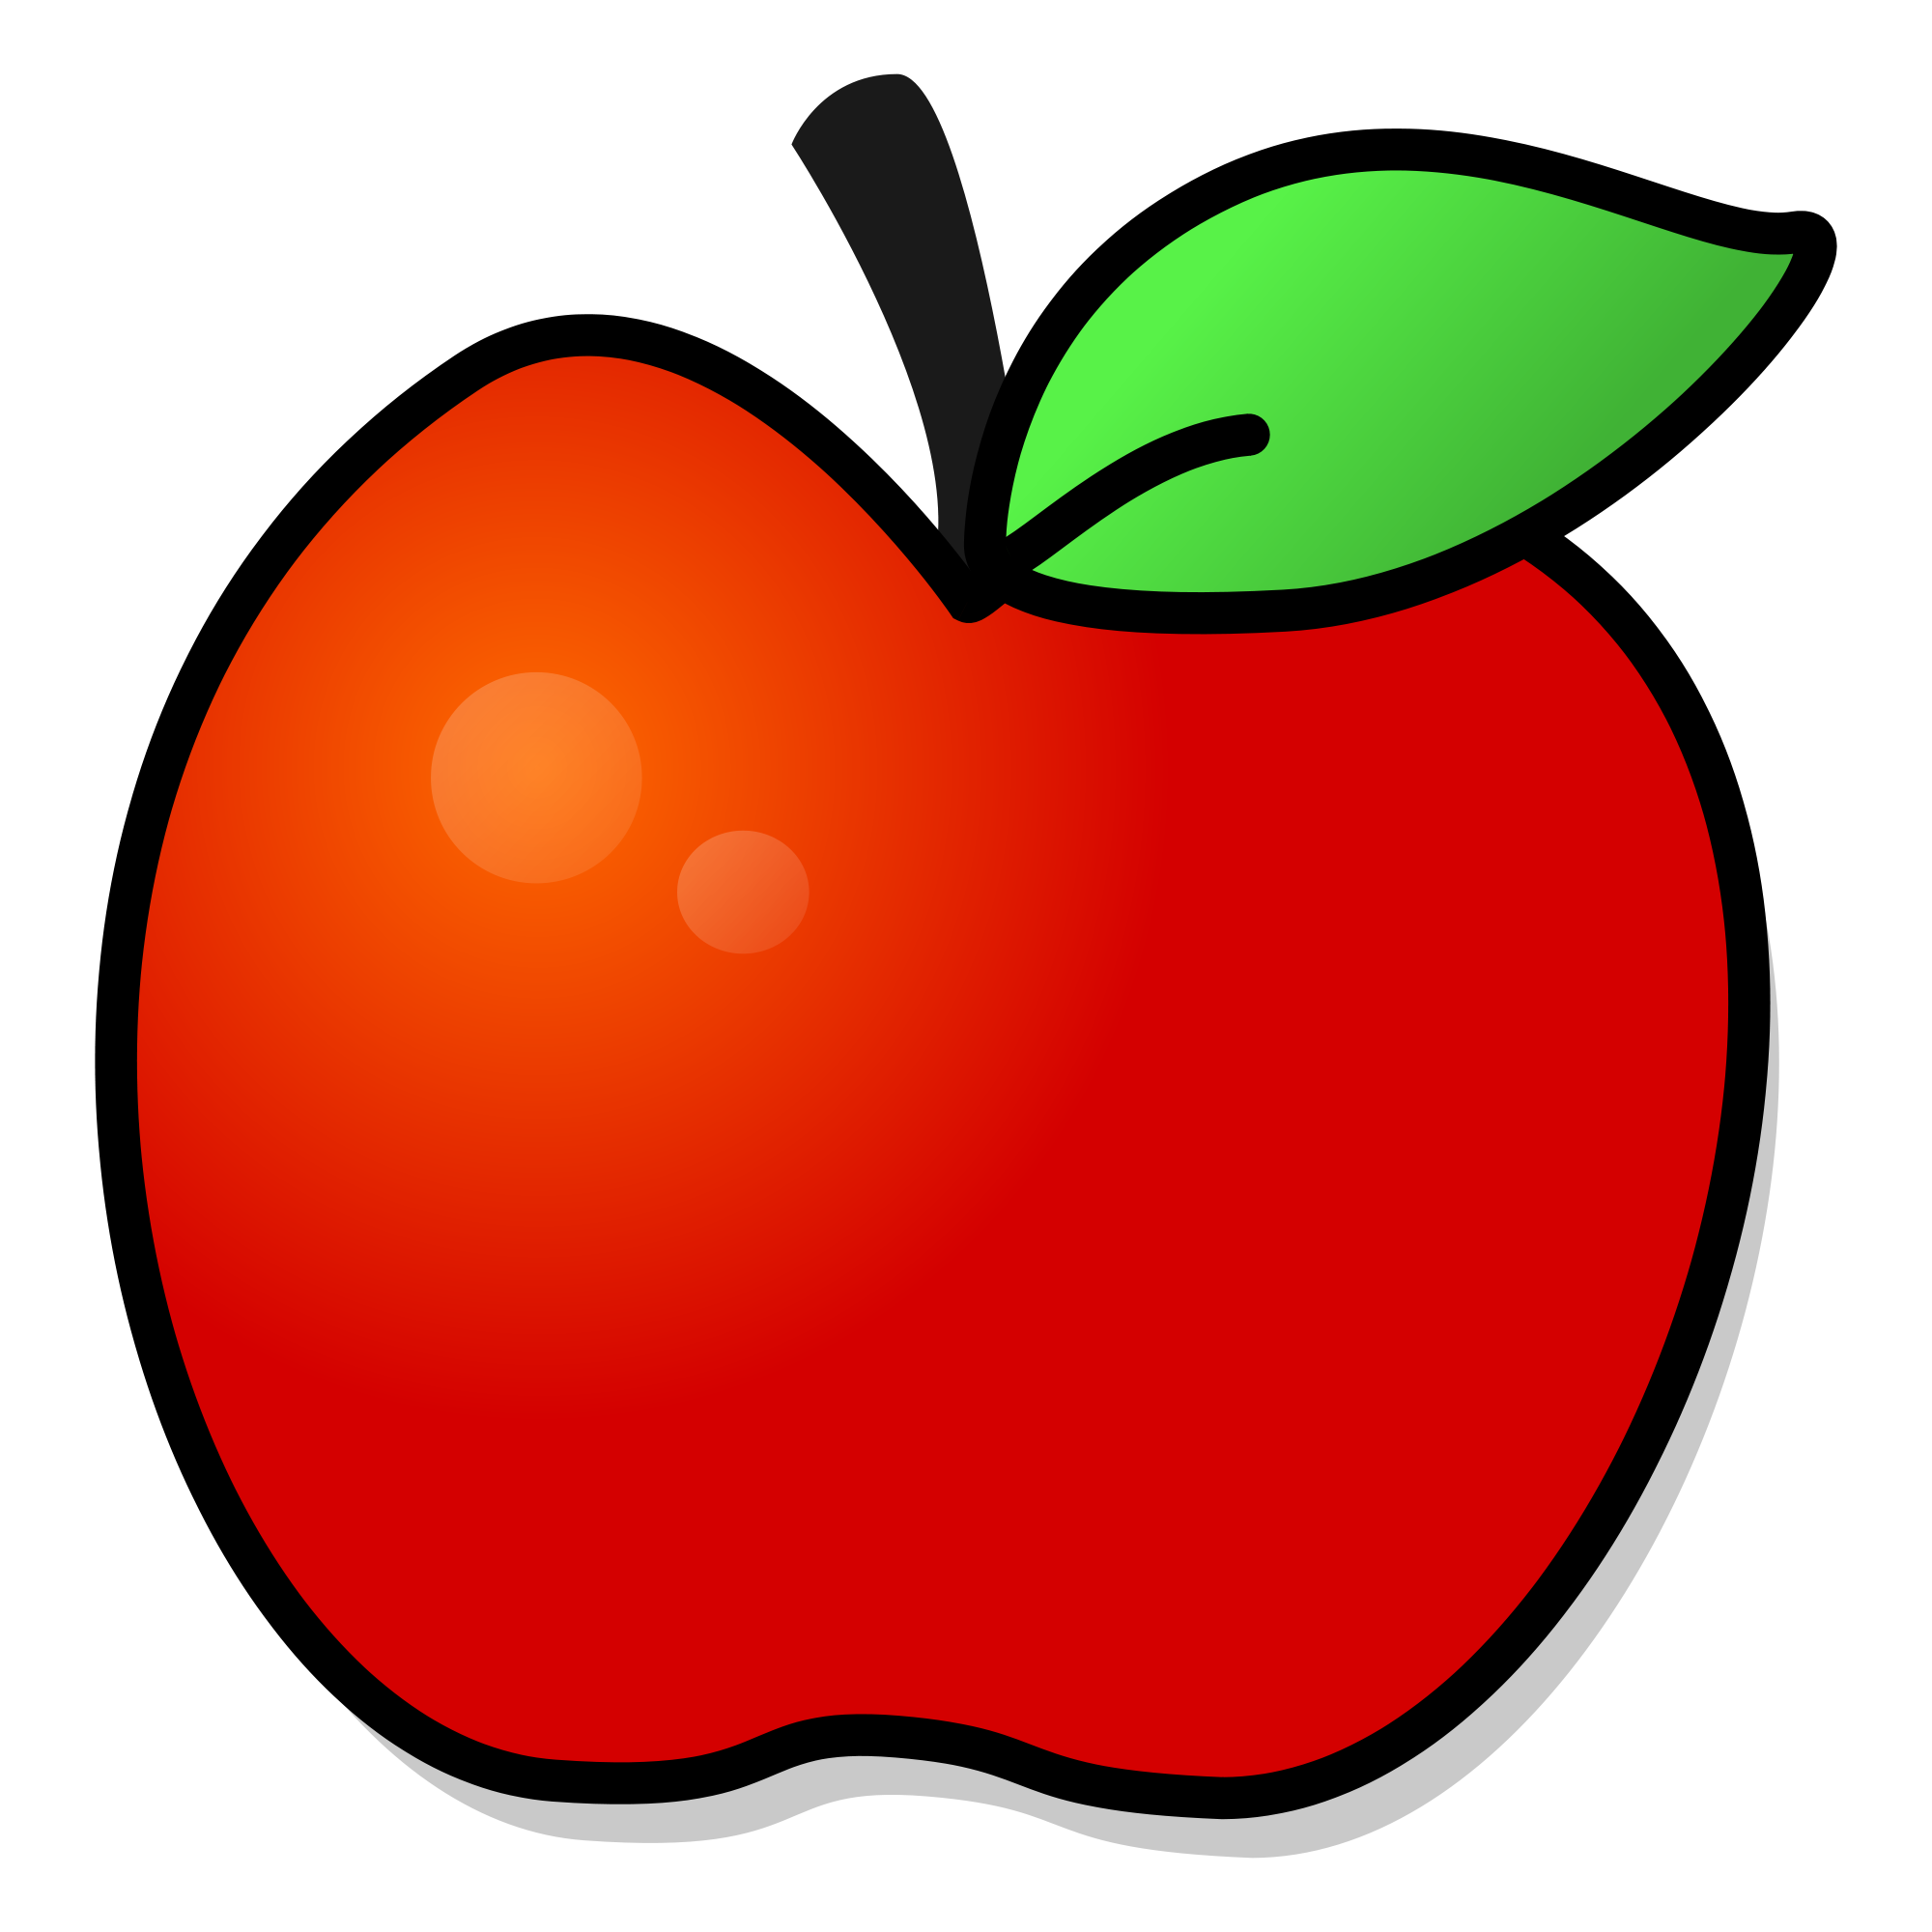 Red Apple Images Free download on ClipArtMag